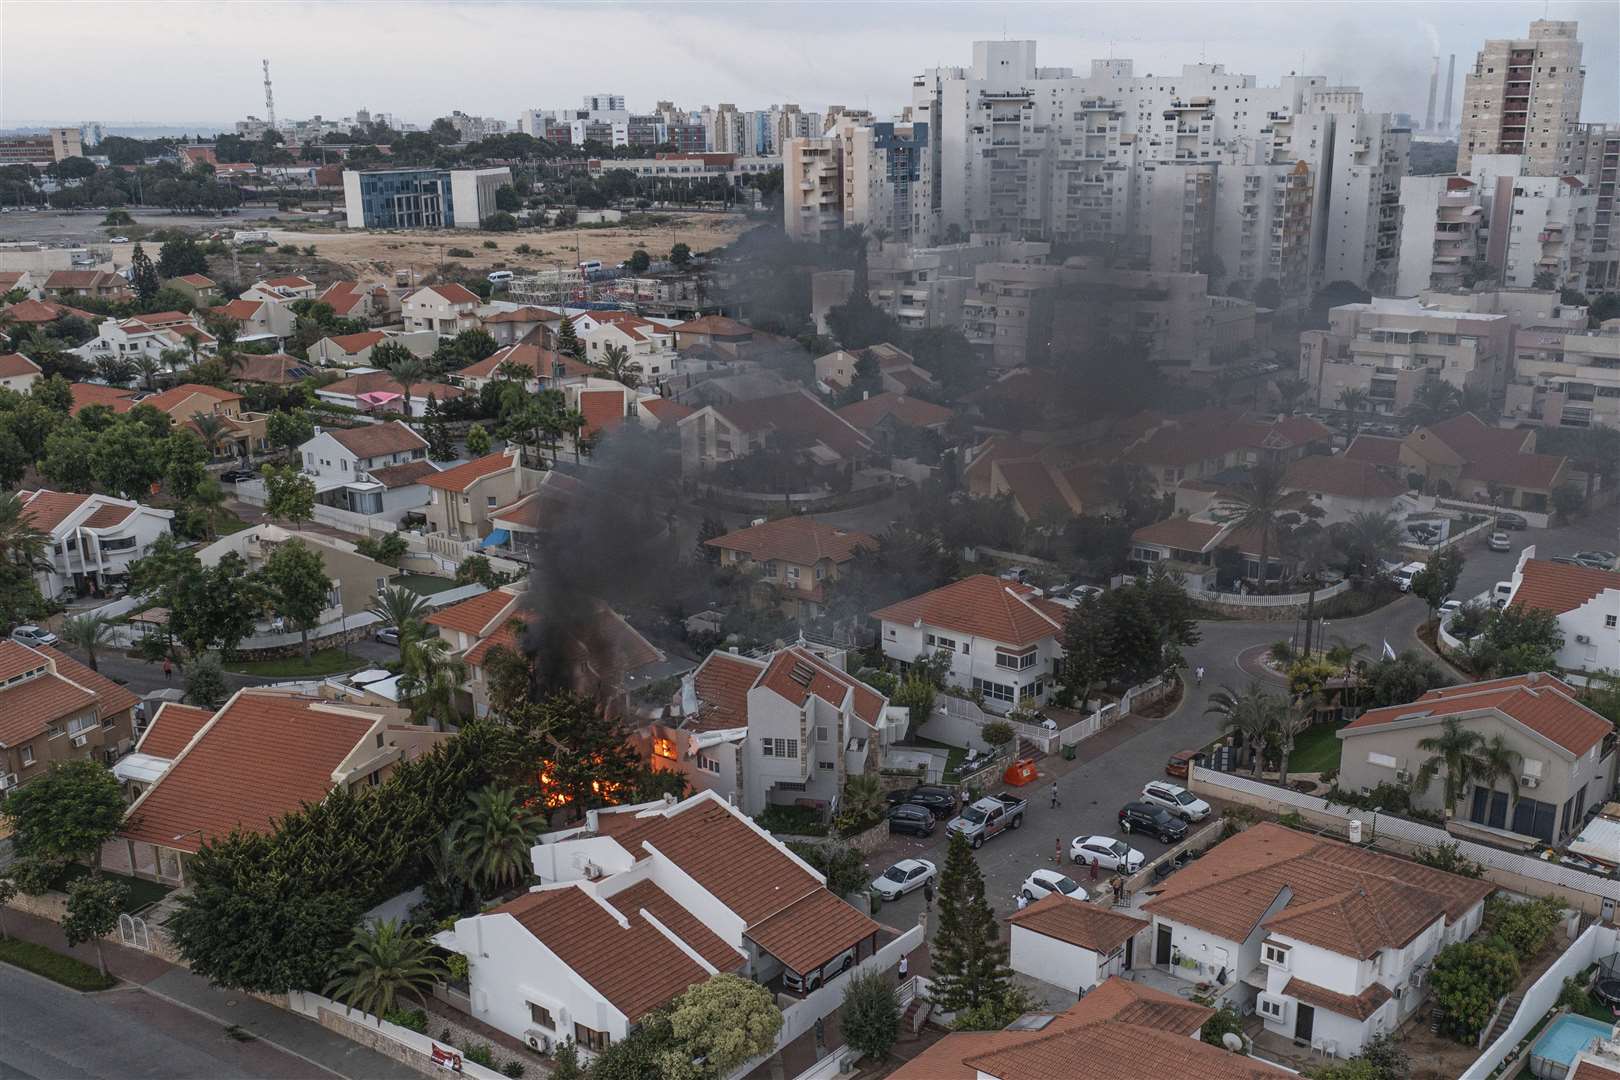 Smoke rises after a rocket fired from the Gaza Strip hit a house in Ashkelon, southern Israel (Tsafrir Abayov/AP)